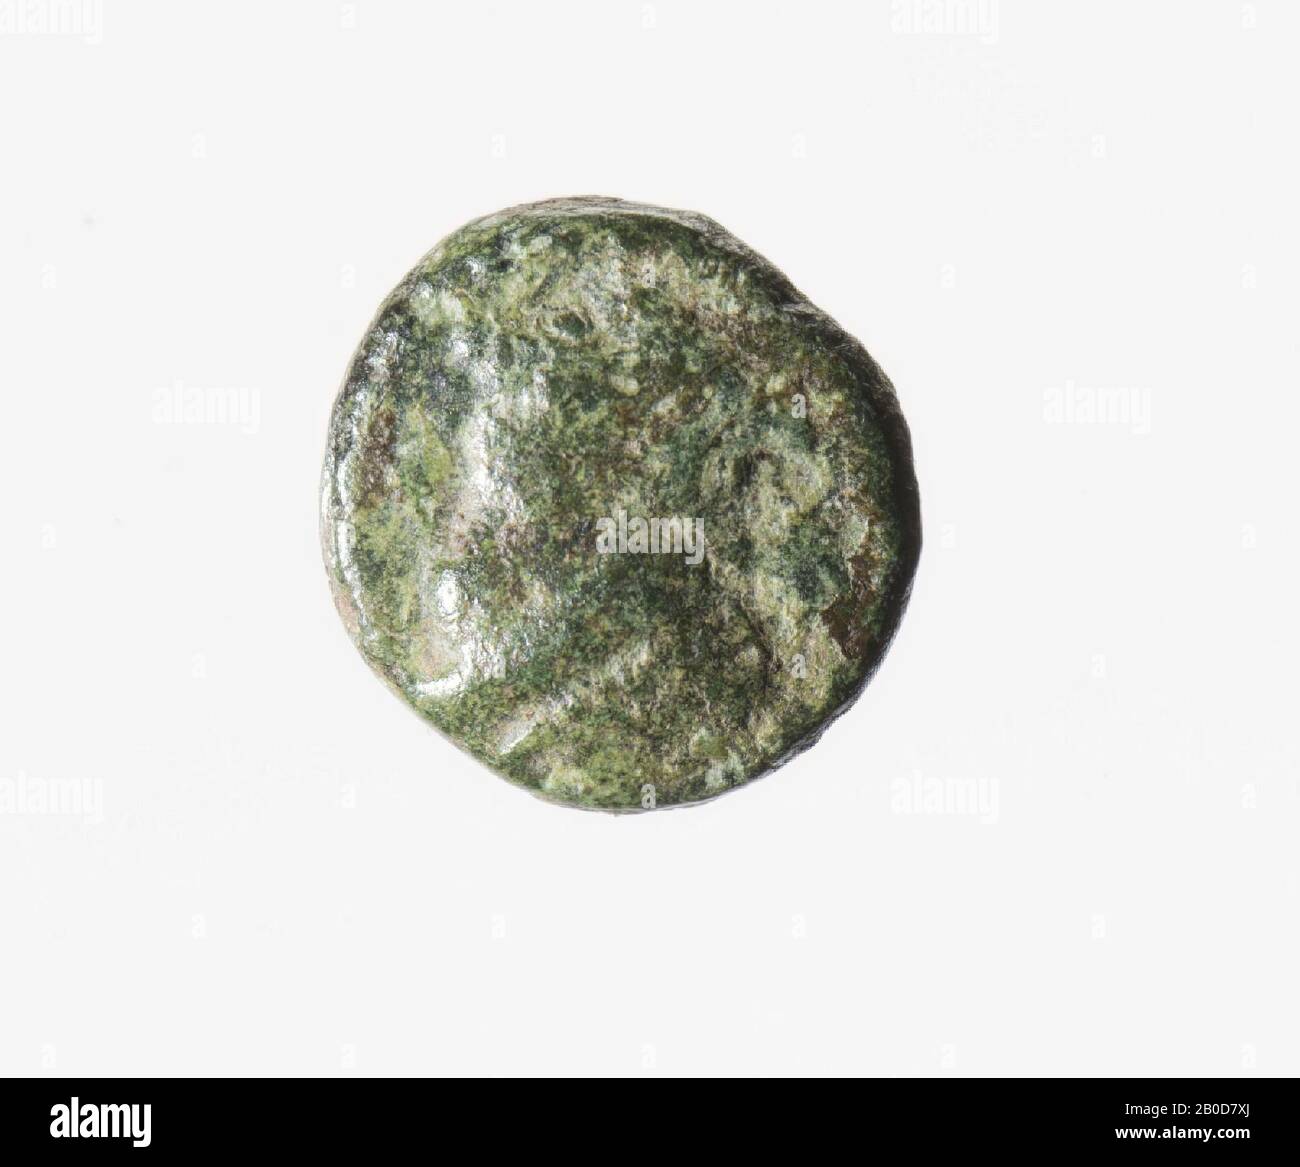 Front: Head king, right. Strongly worn. Reverse: heavily worn., Coin, by Alexander the Great, metal, bronze, diam: 0.9 cm, wt. 0.95 grams, 336-323 BC, unknown Stock Photo